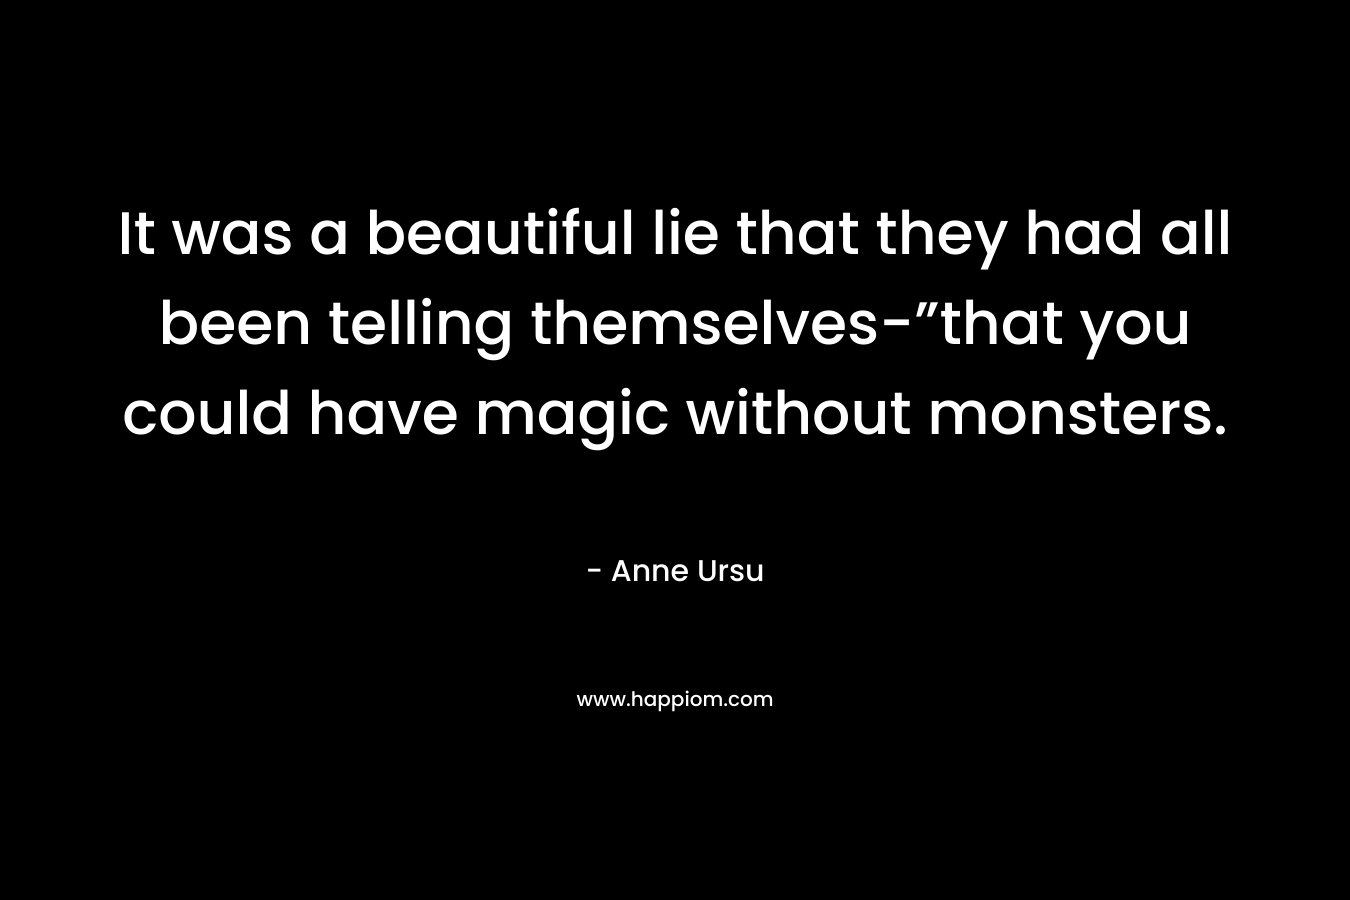 It was a beautiful lie that they had all been telling themselves-”that you could have magic without monsters. – Anne Ursu